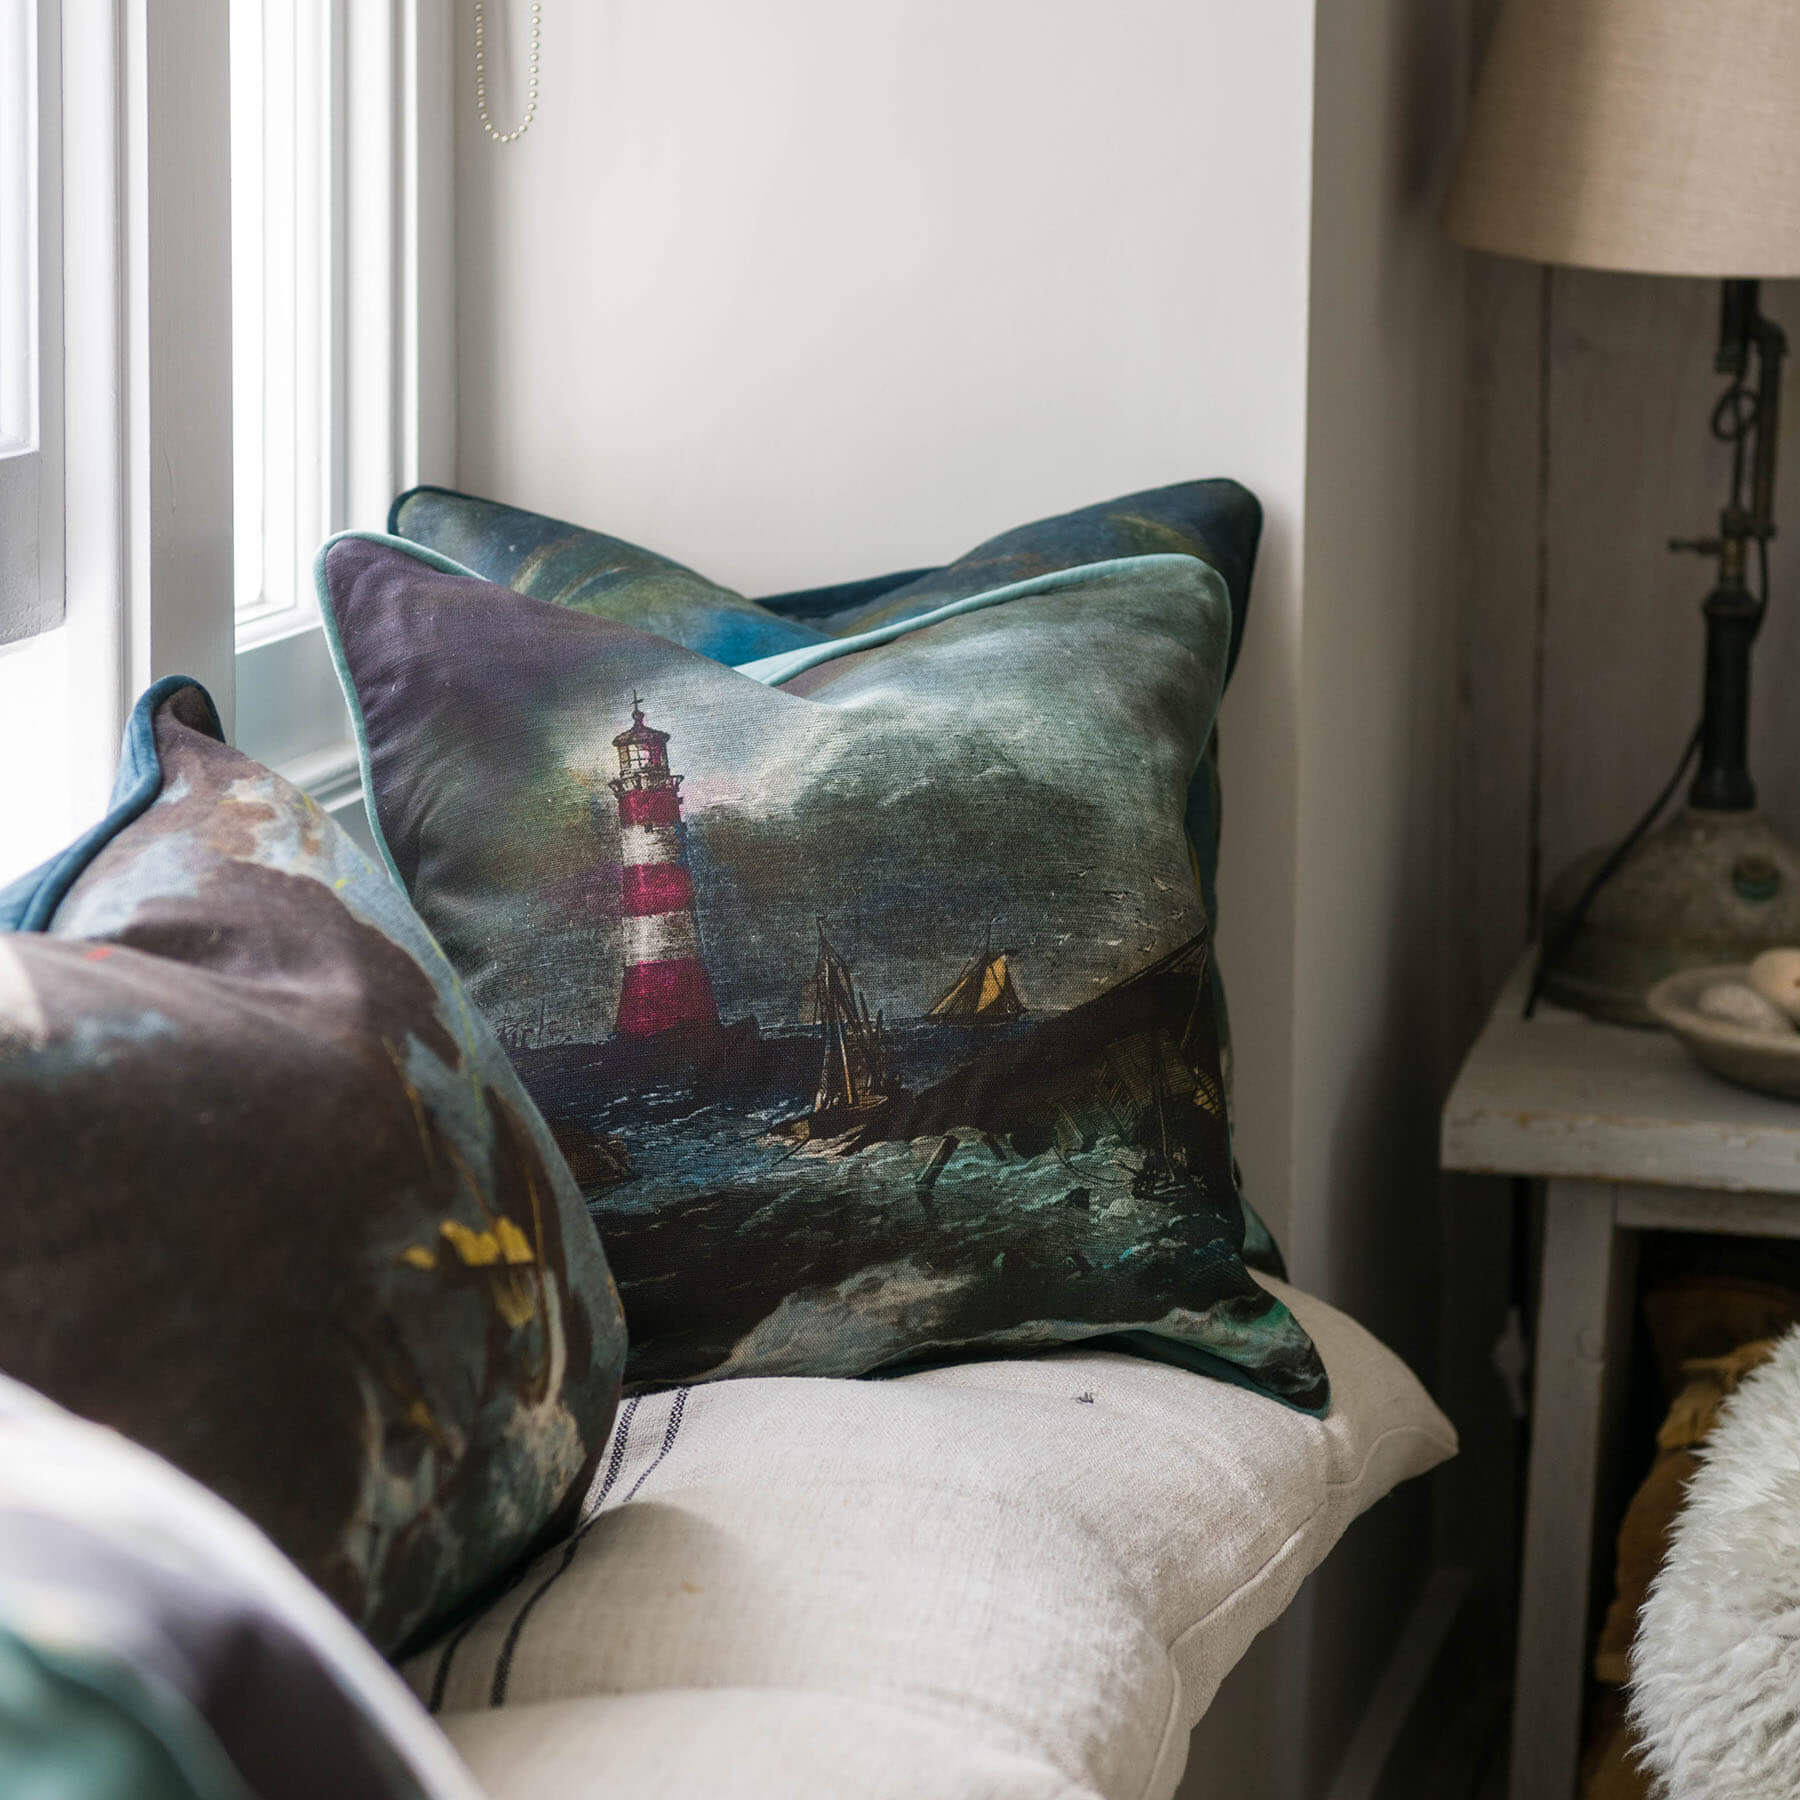 Lighthouse Cushion cover placed on a window seat next to other  shipwreck cushions,in the background you can see a table with a lamp on